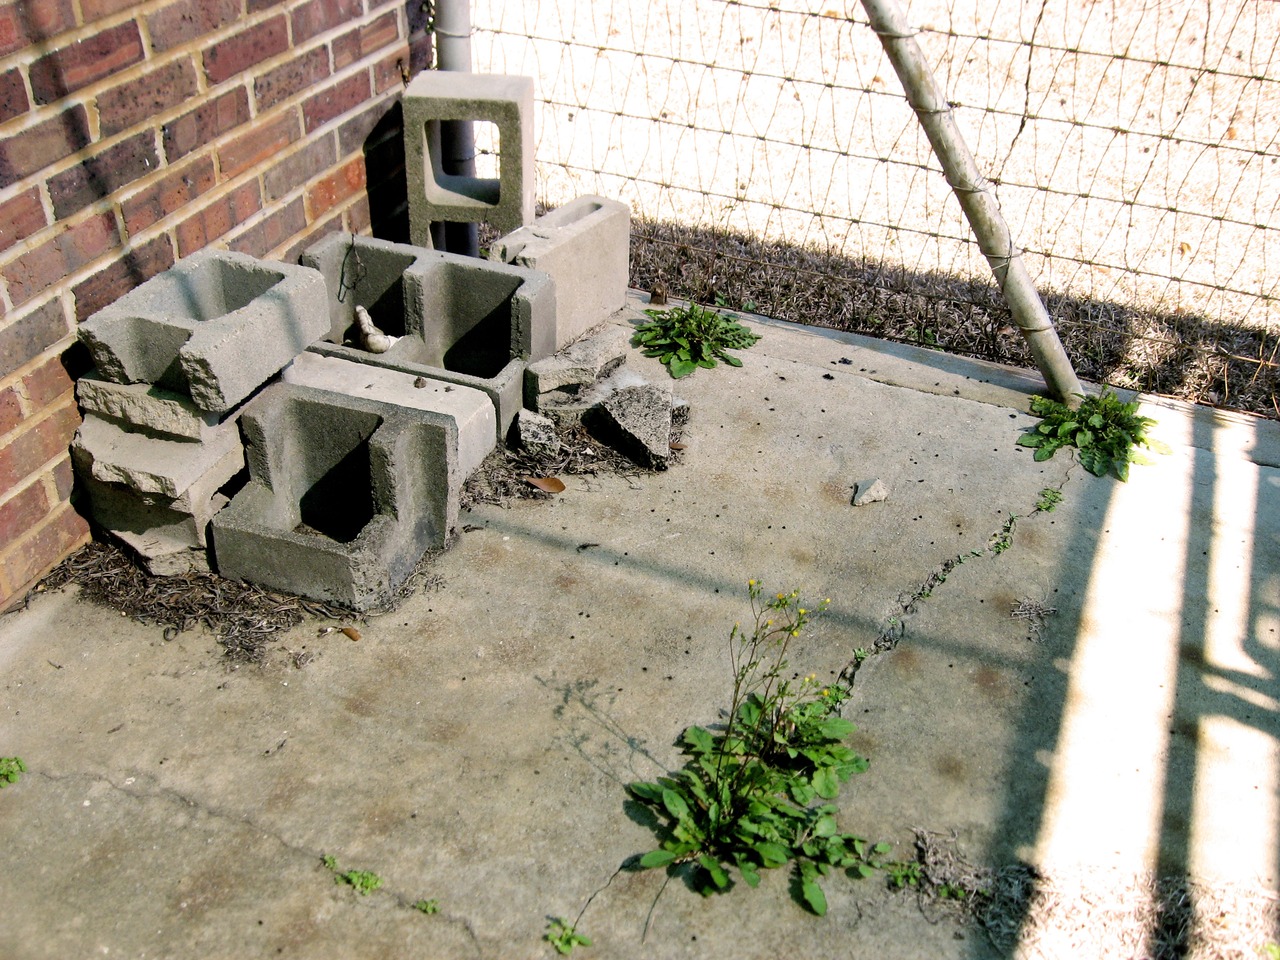 Cinder blocks in a pile in the outdoor kennel area of the Dog Hospital (1929) at Pebble Hill Plantation.